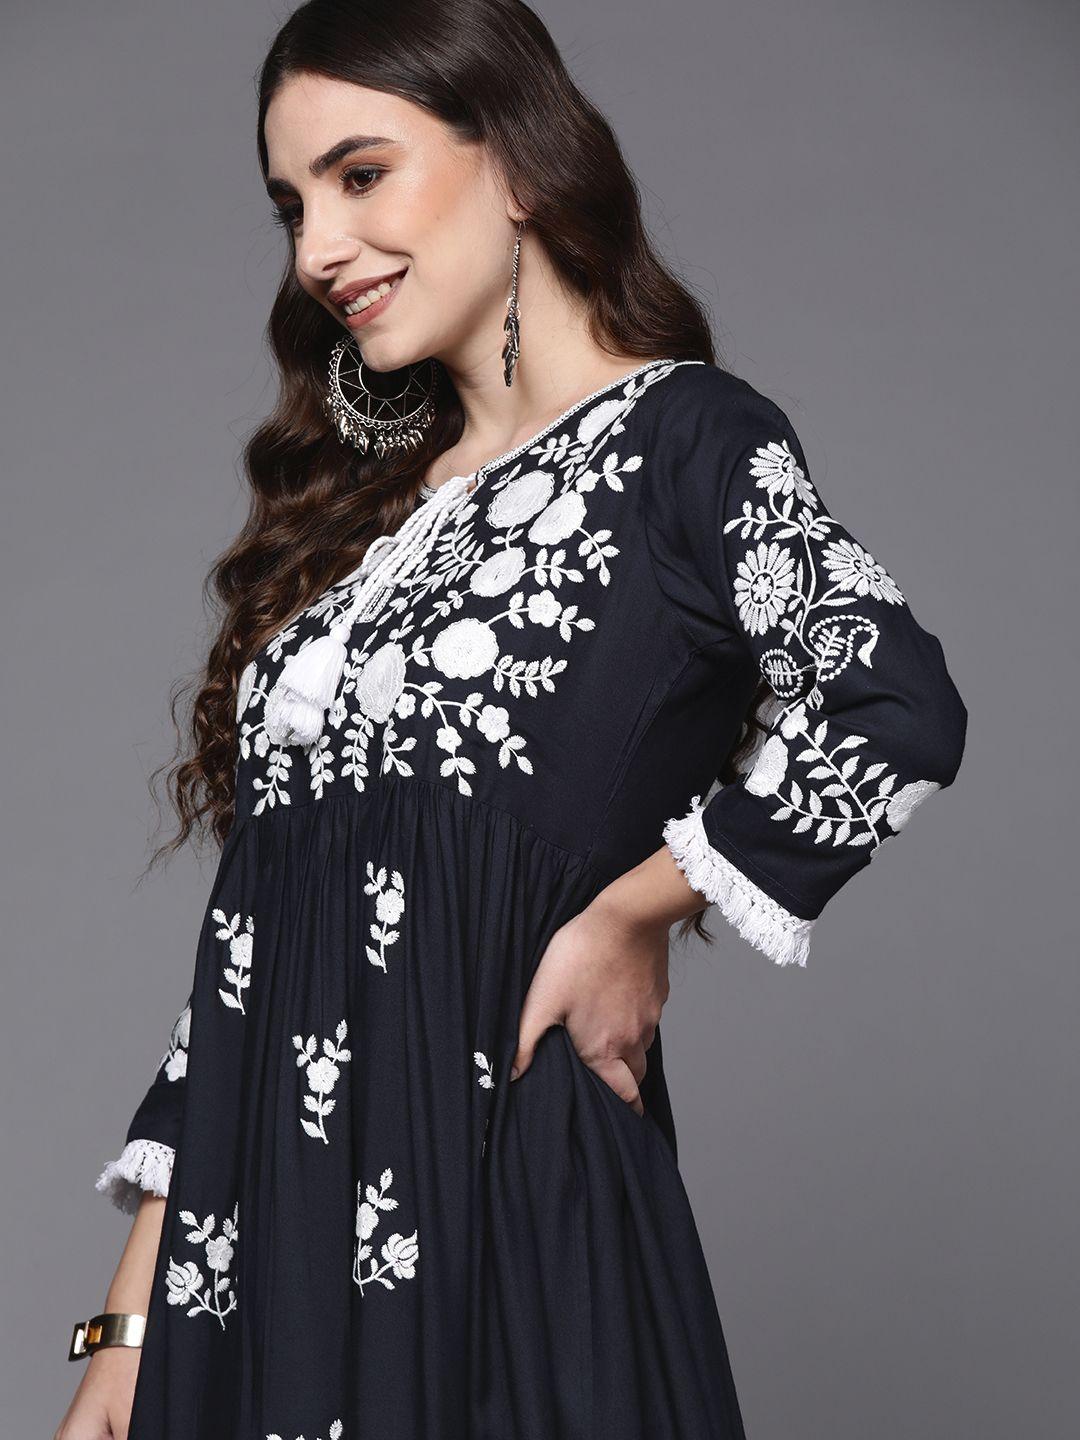 indo-era-navy-blue-&-white-floral-embroidered-tie-up-neck-ethnic-a-line-midi-dress